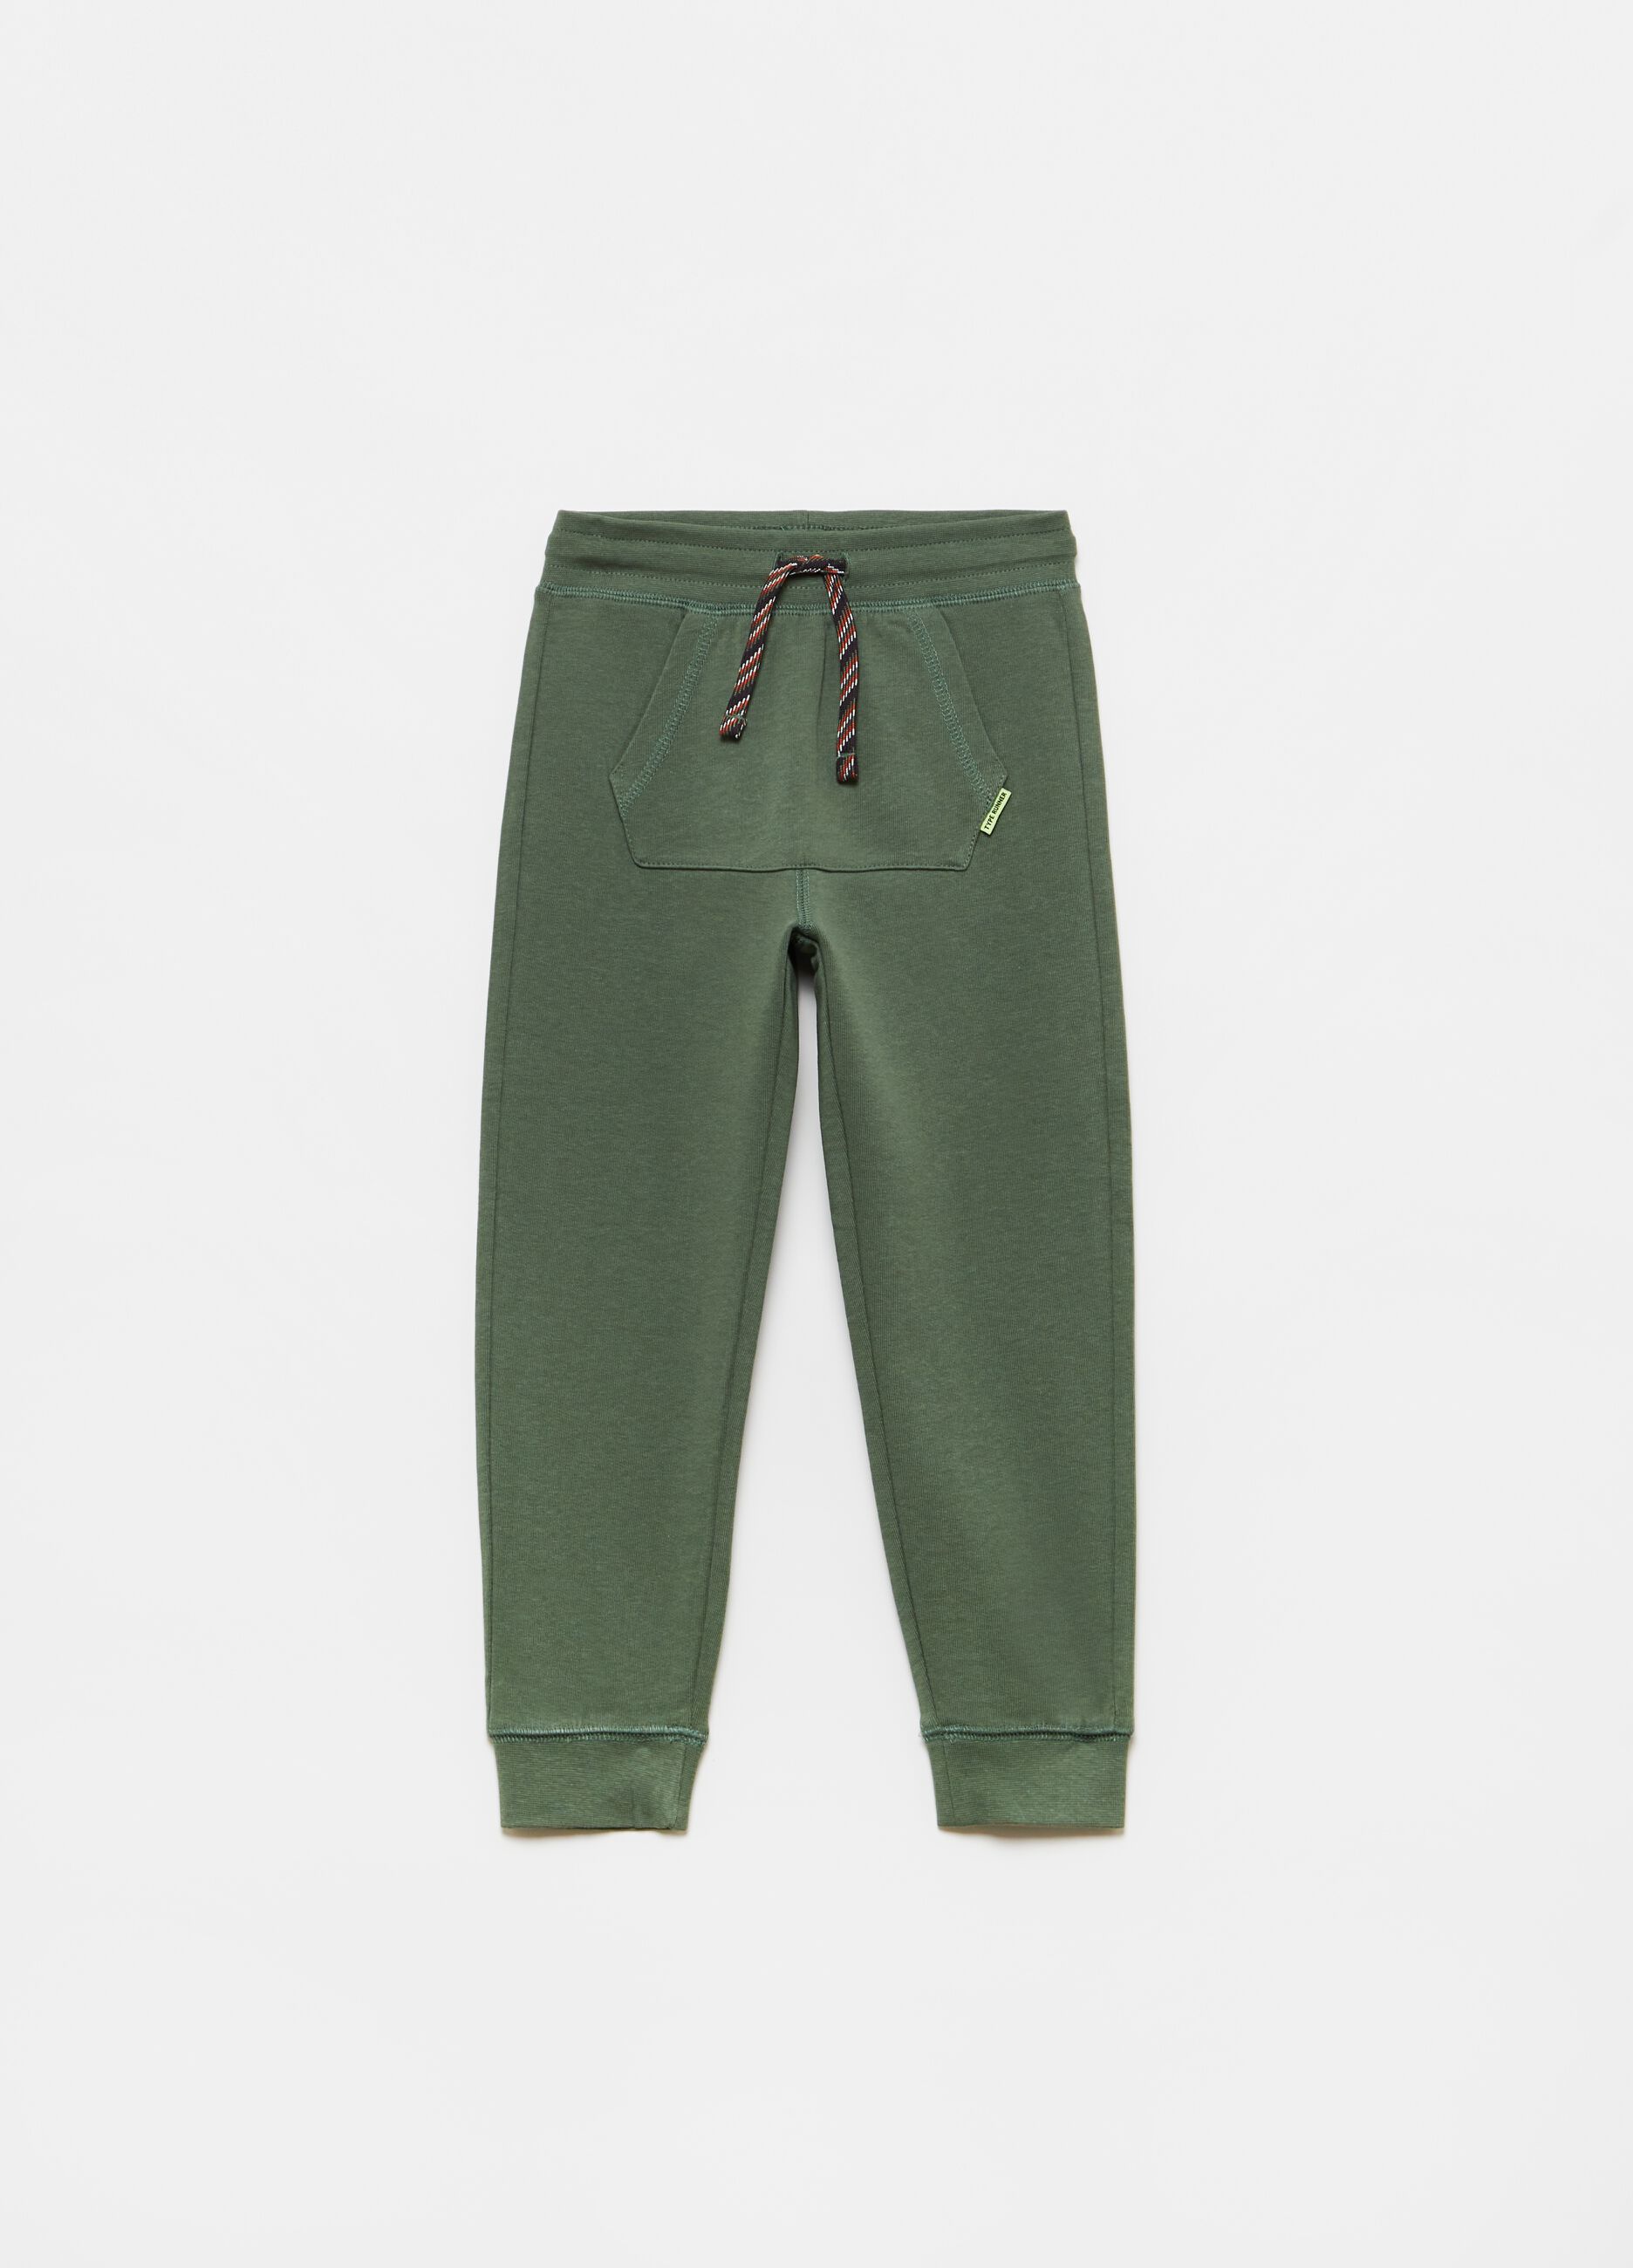 100% cotton French terry joggers